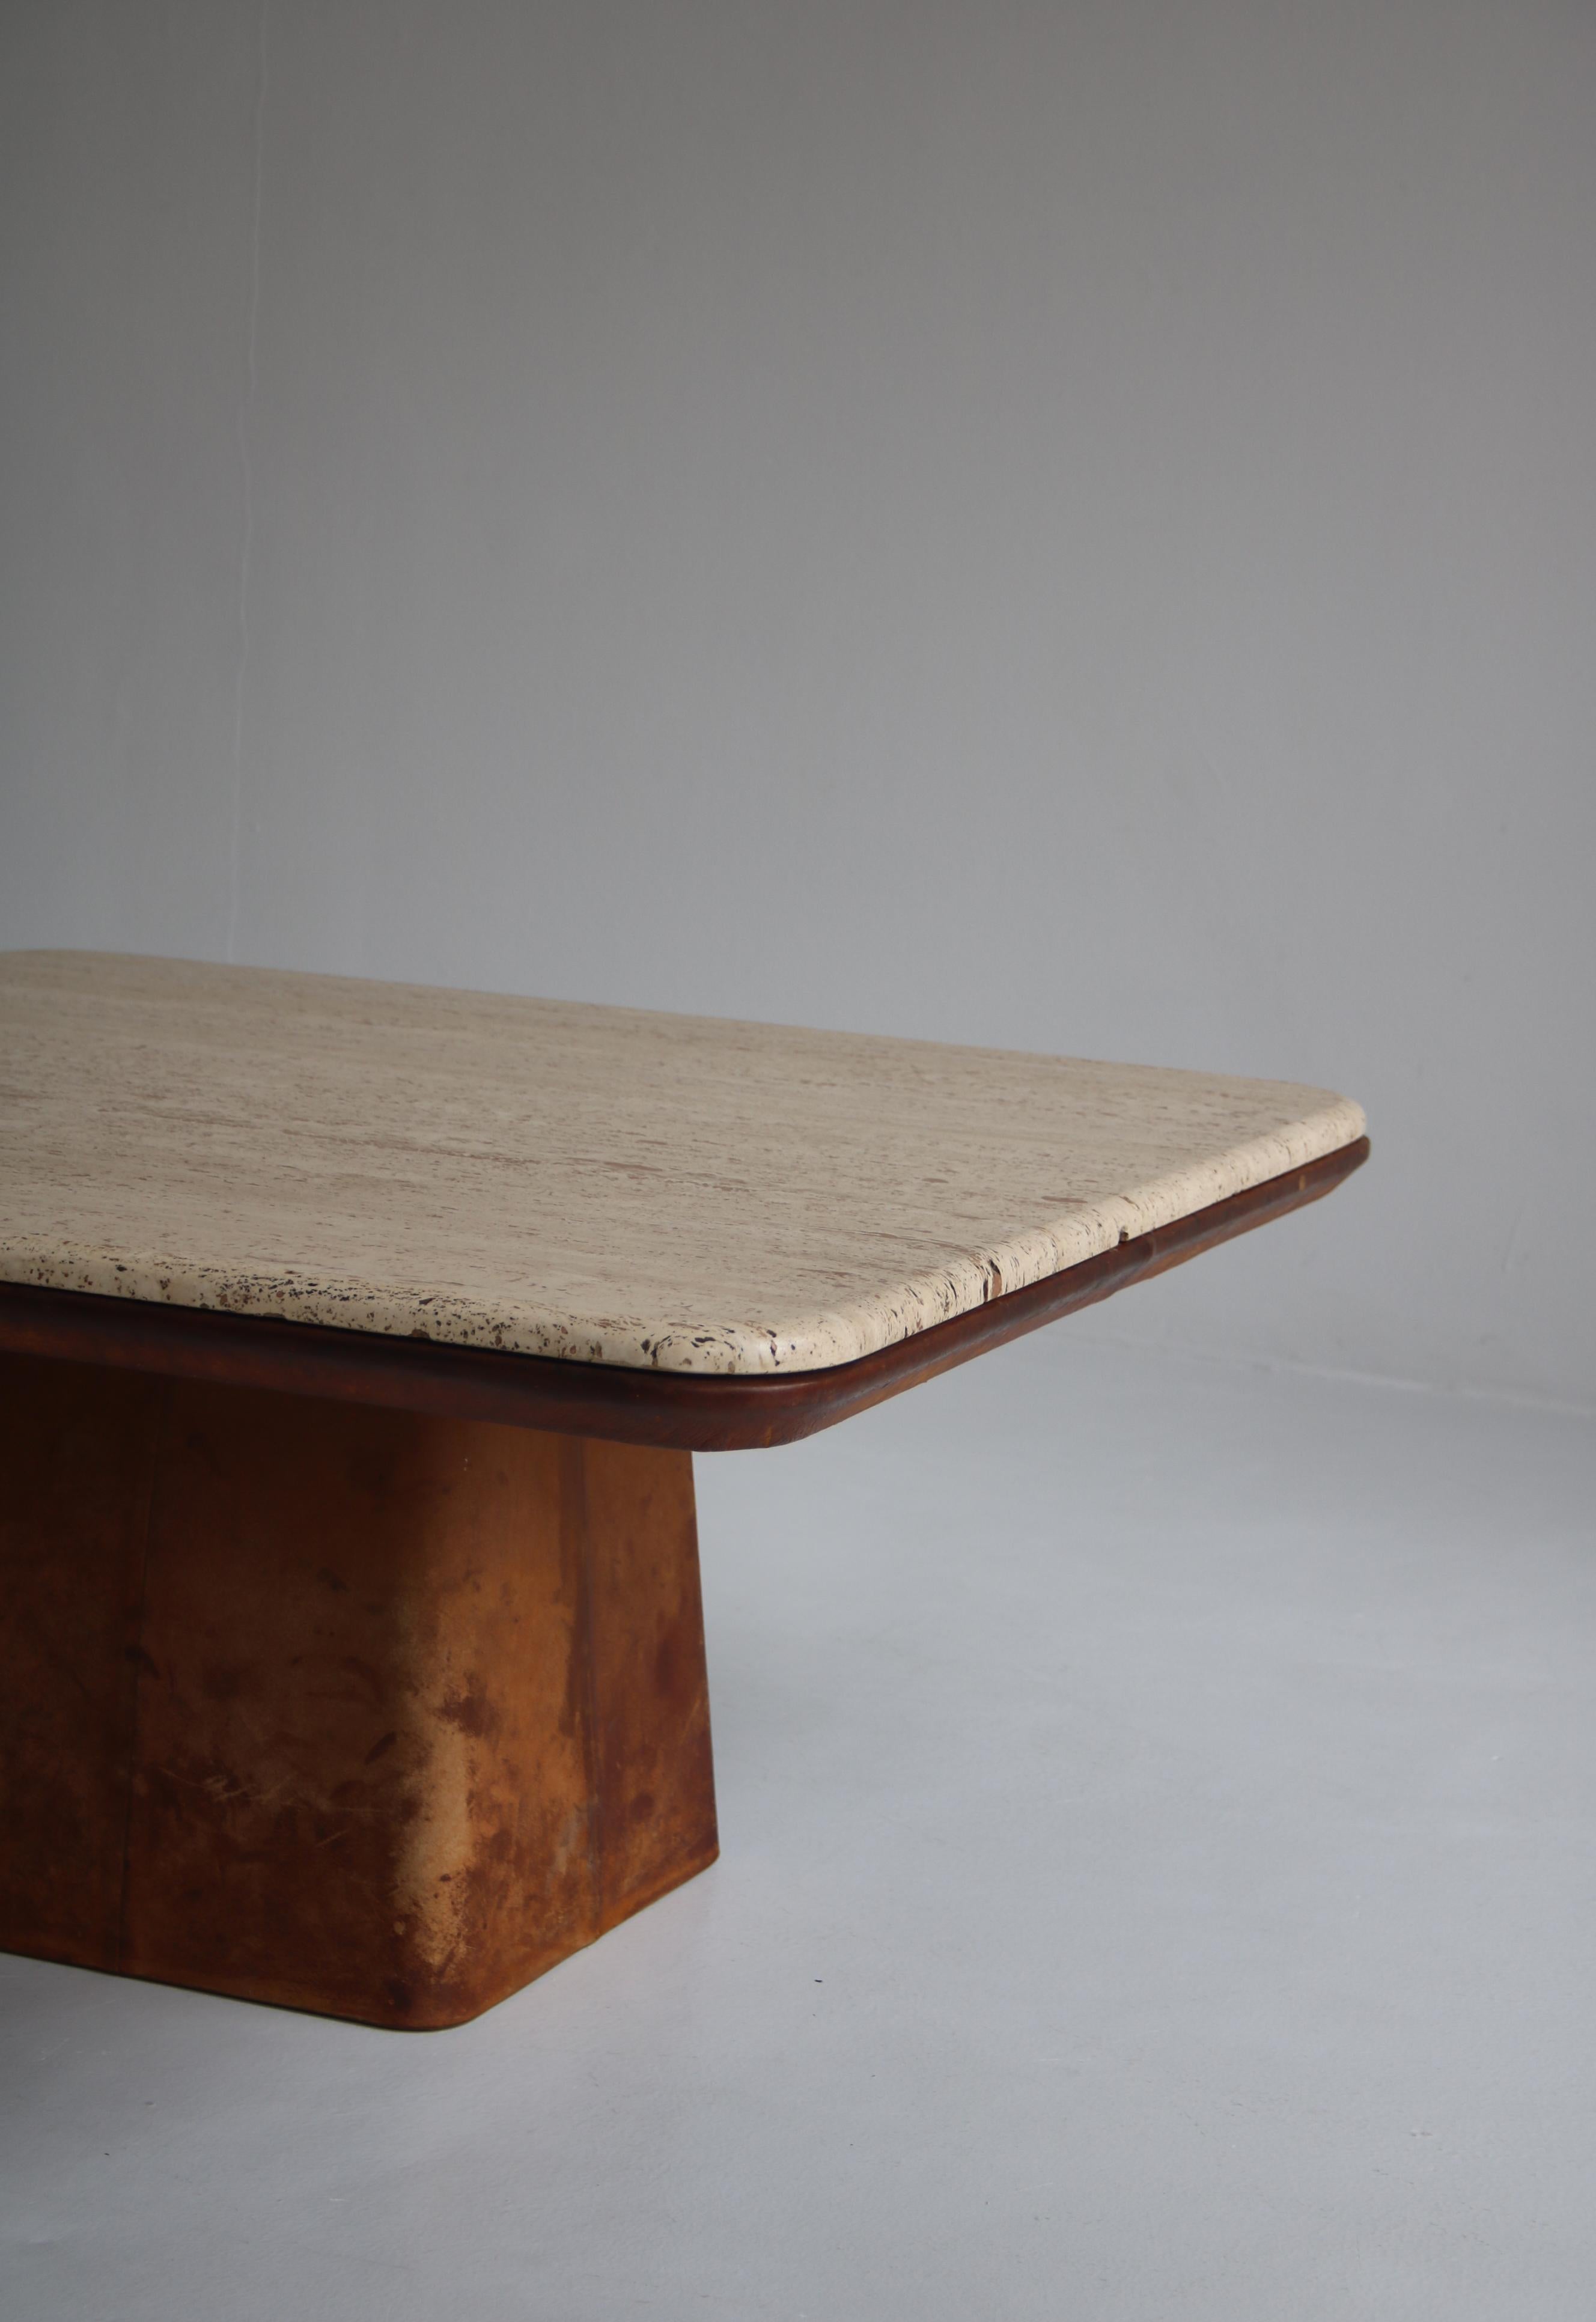 Large De Sede coffee Table in Travertine and Natural Leather, Switzerland, 1970s In Good Condition For Sale In Odense, DK